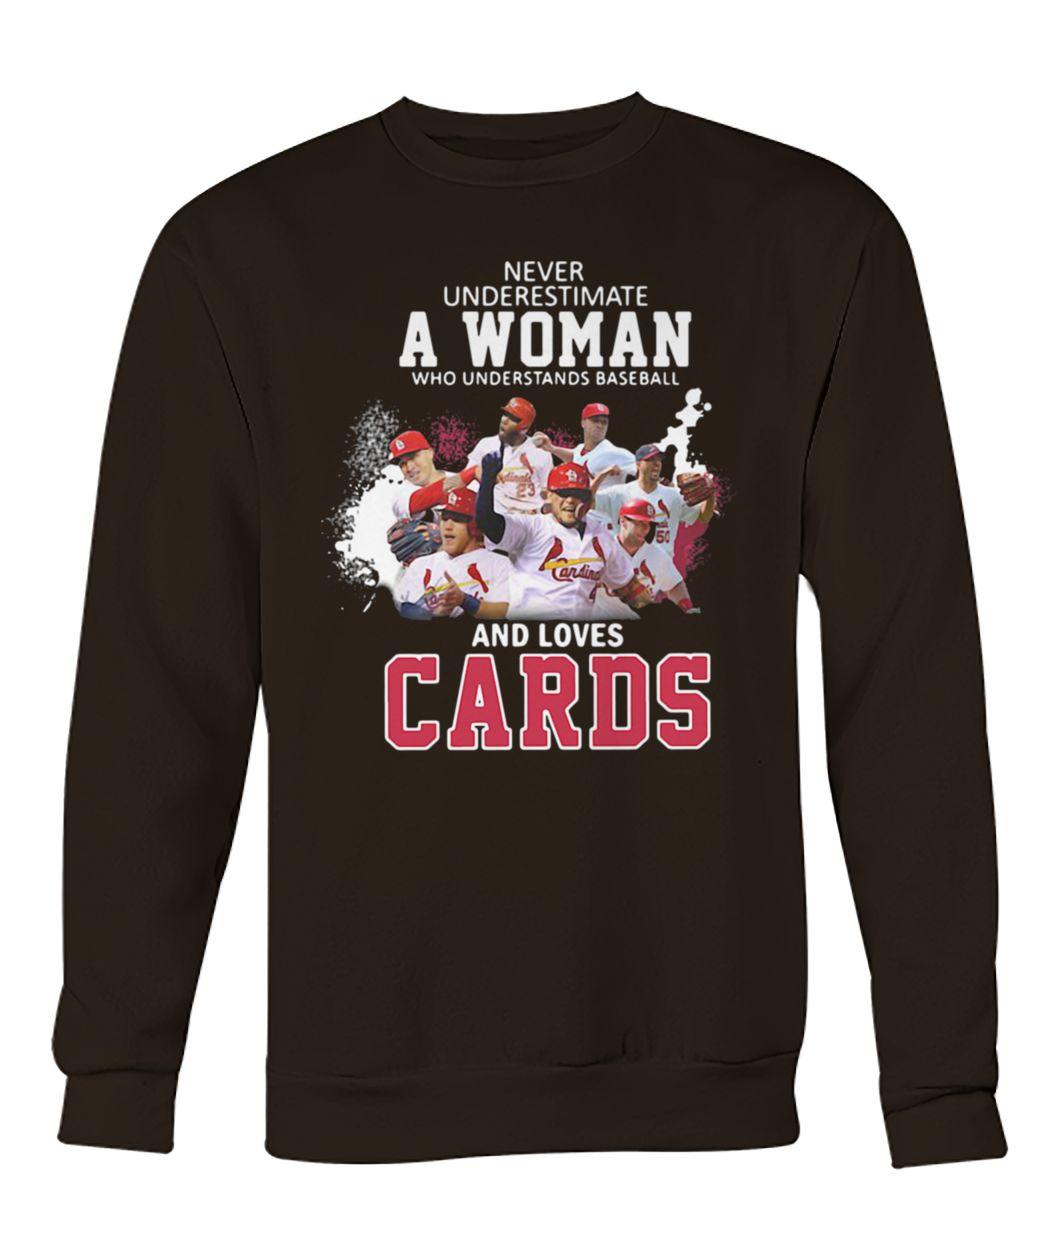 Never underestimate a woman who understands baseball and loves st louis cardinals sweatshirt